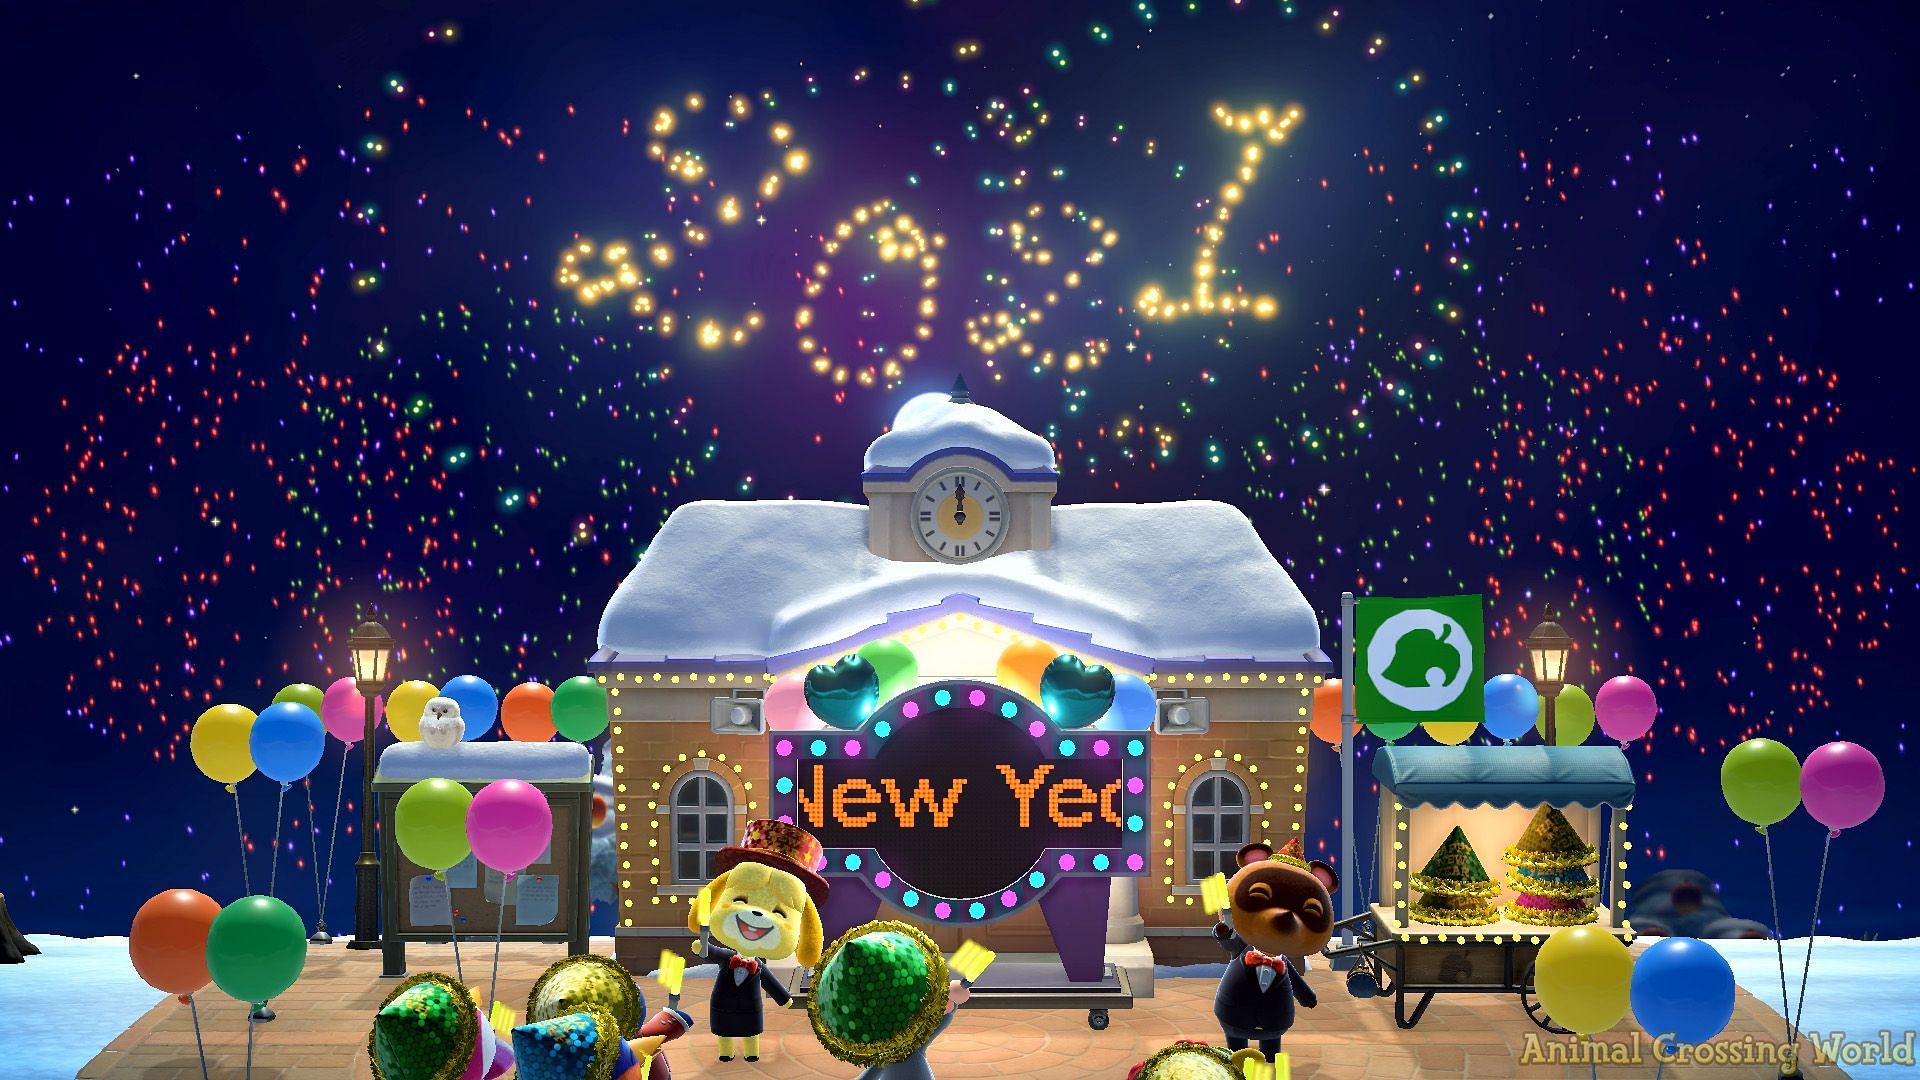 Each year is celebrated in Animal Crossing: New Horizons (Image via Animal Crossing World)